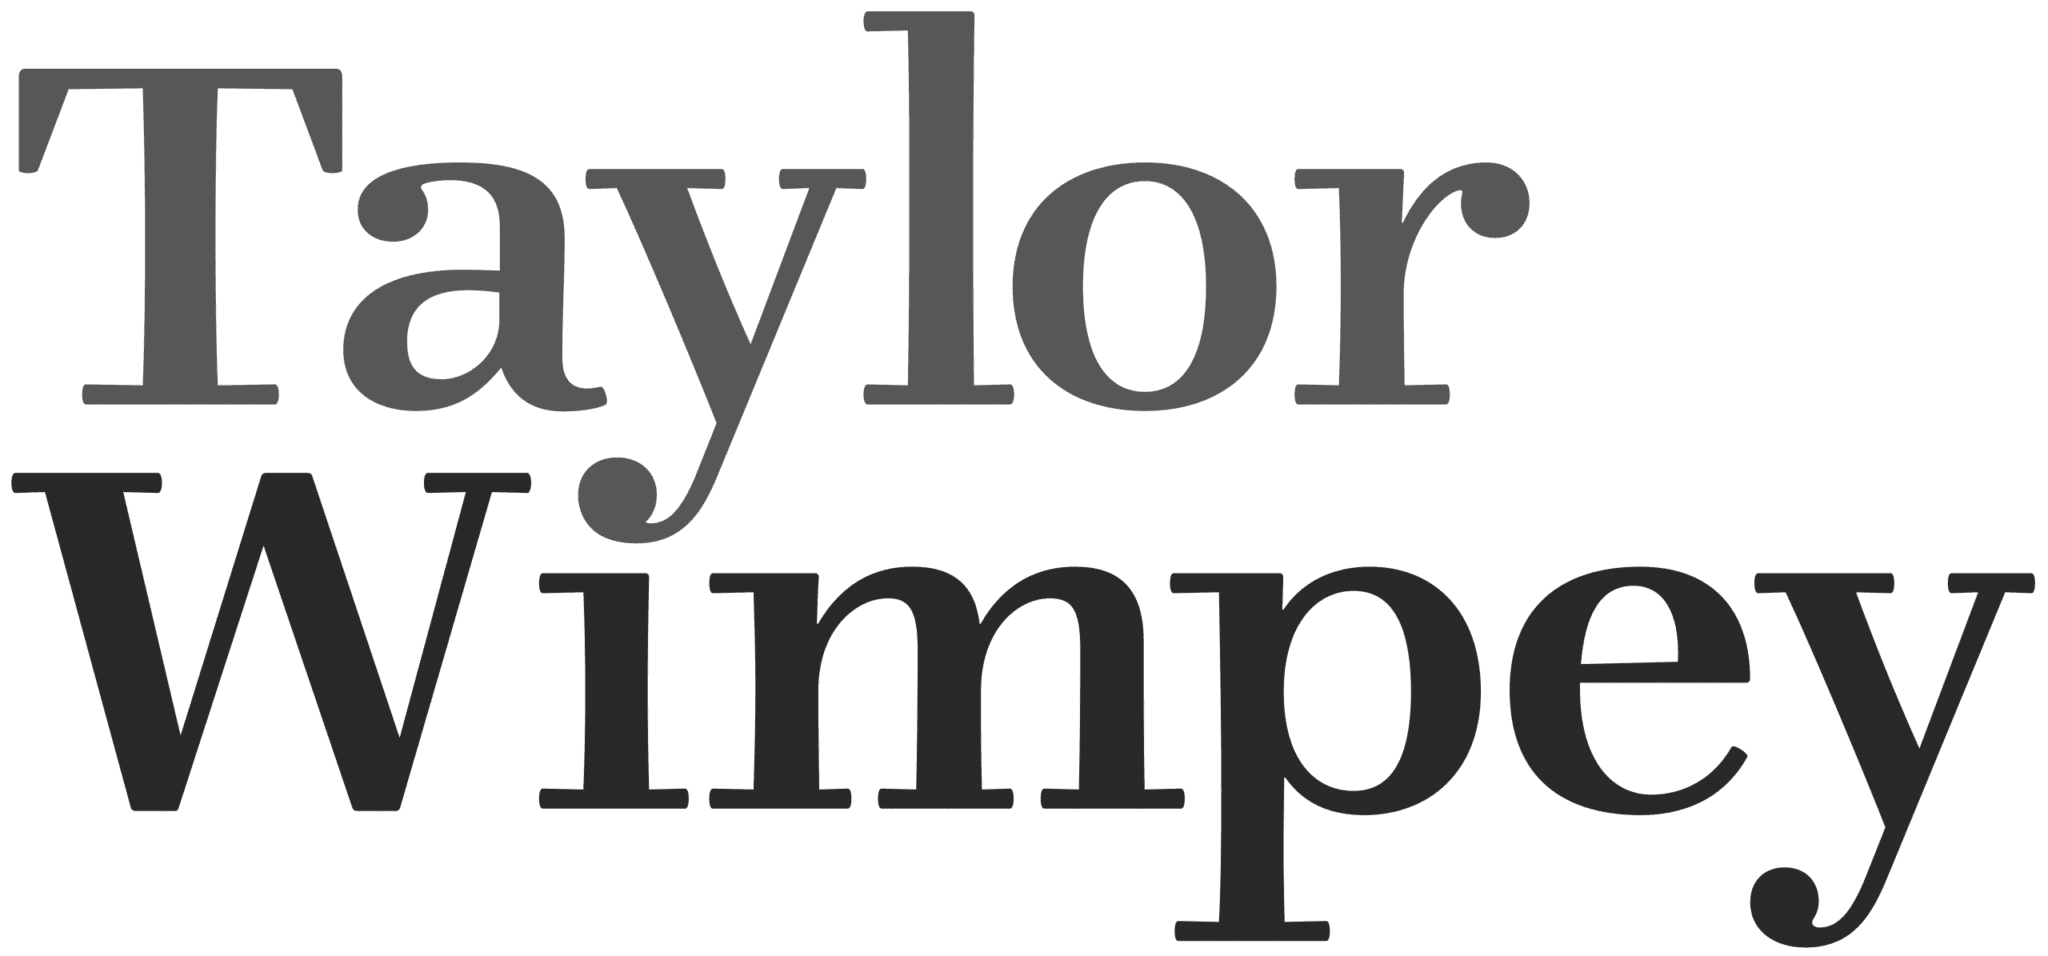 Taylor_Wimpey_logo-BW-1.png